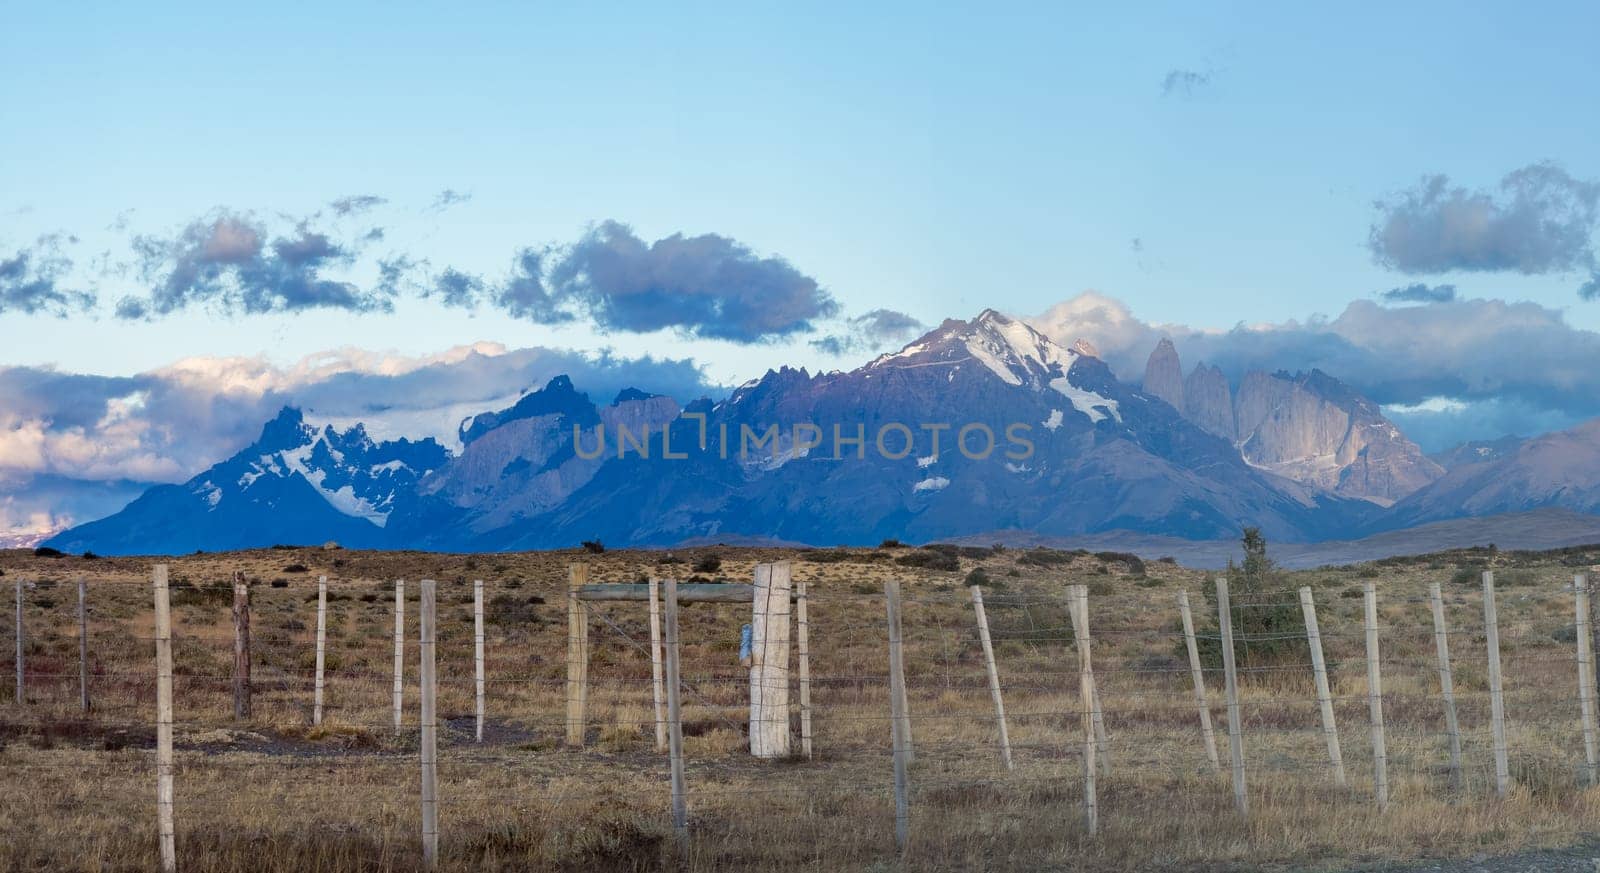 Majestic Mountain Ranges Behind Rustic Wooden Fence by FerradalFCG